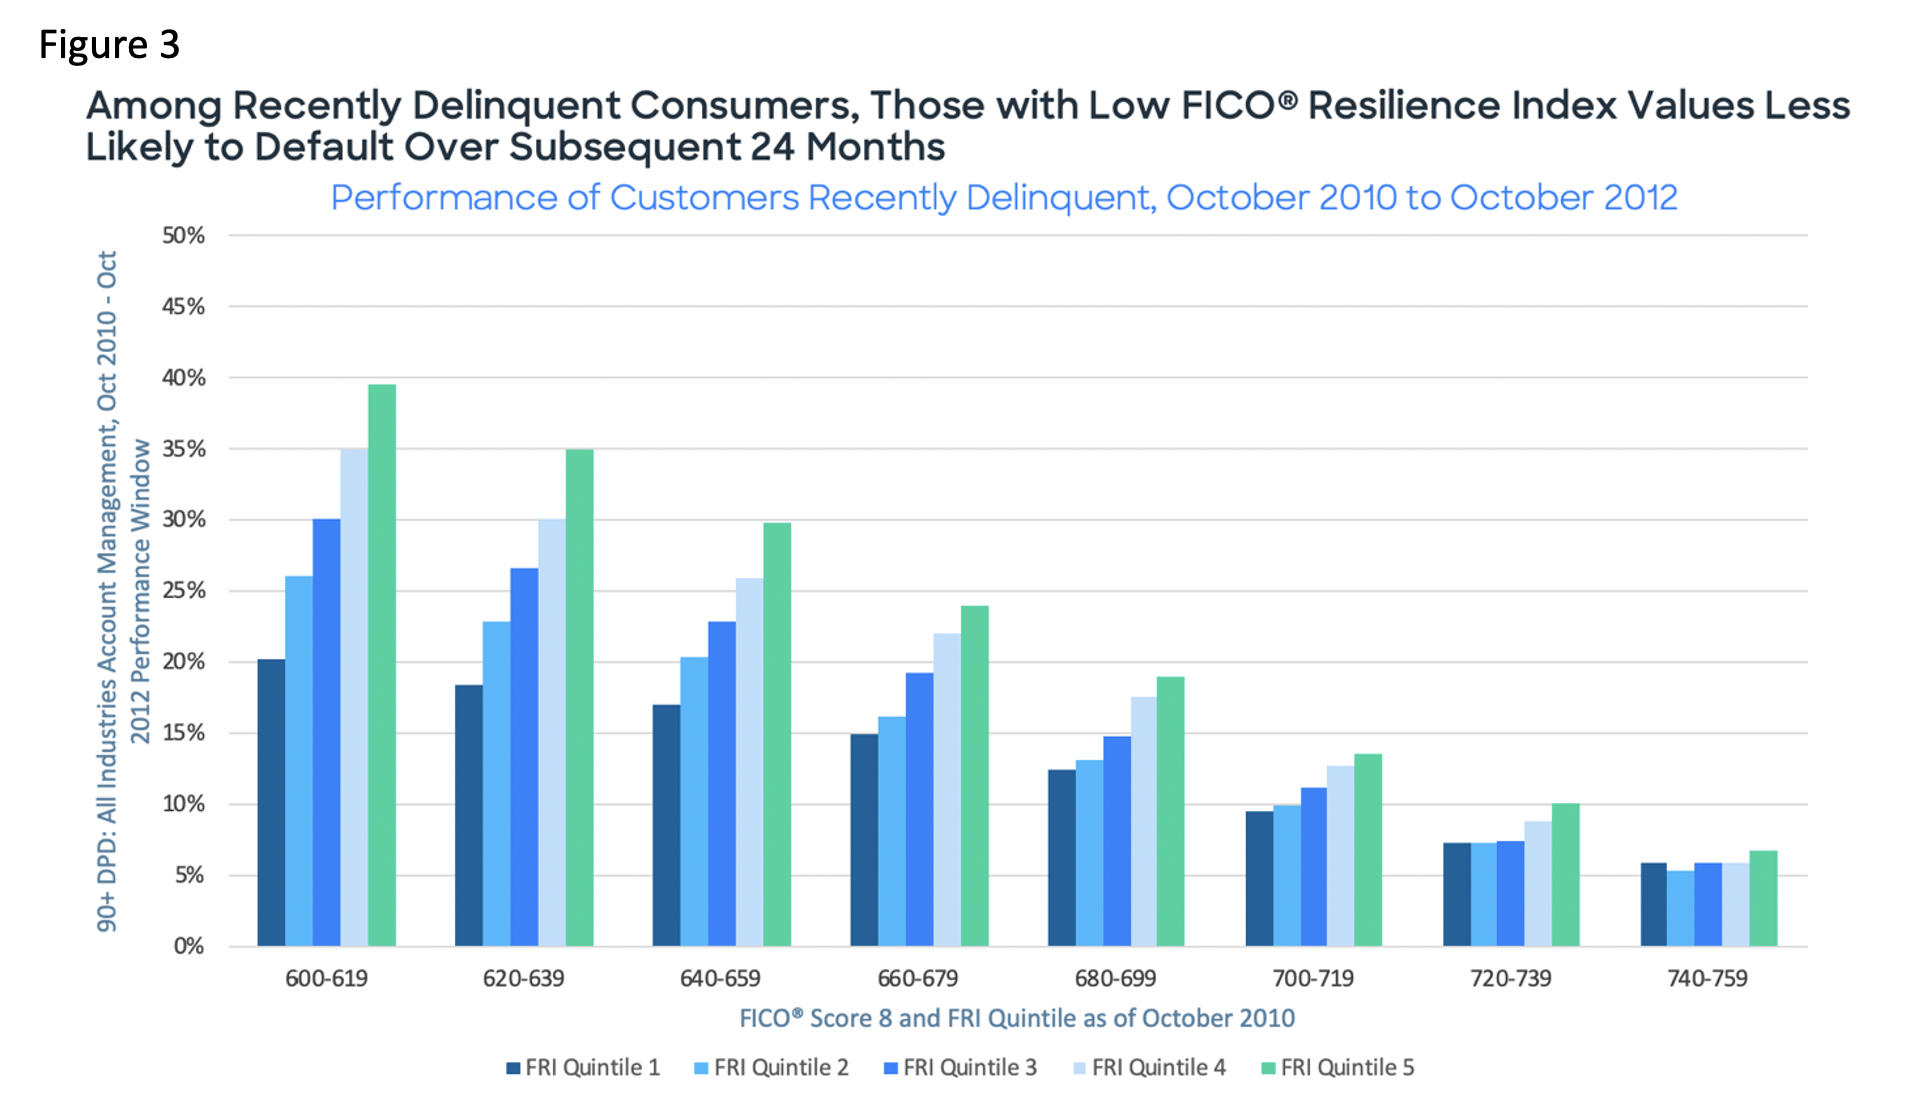 Among delinquent consumers, those with low FRI Values are less likely to default